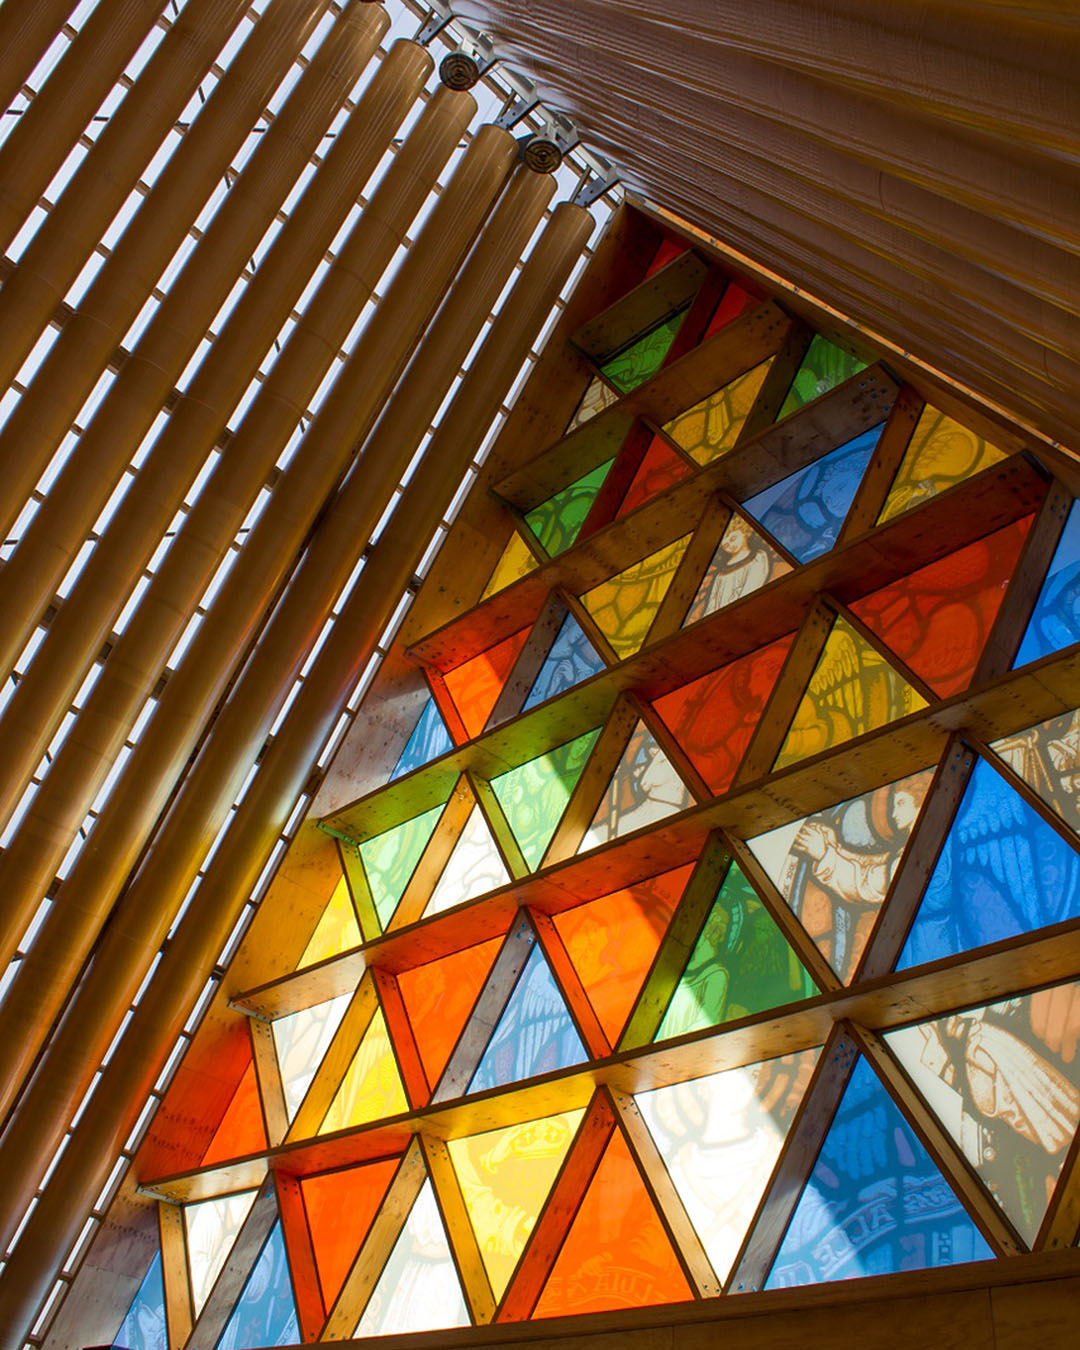 An interior window at Christchurch's famed Cardboard Cathedral.